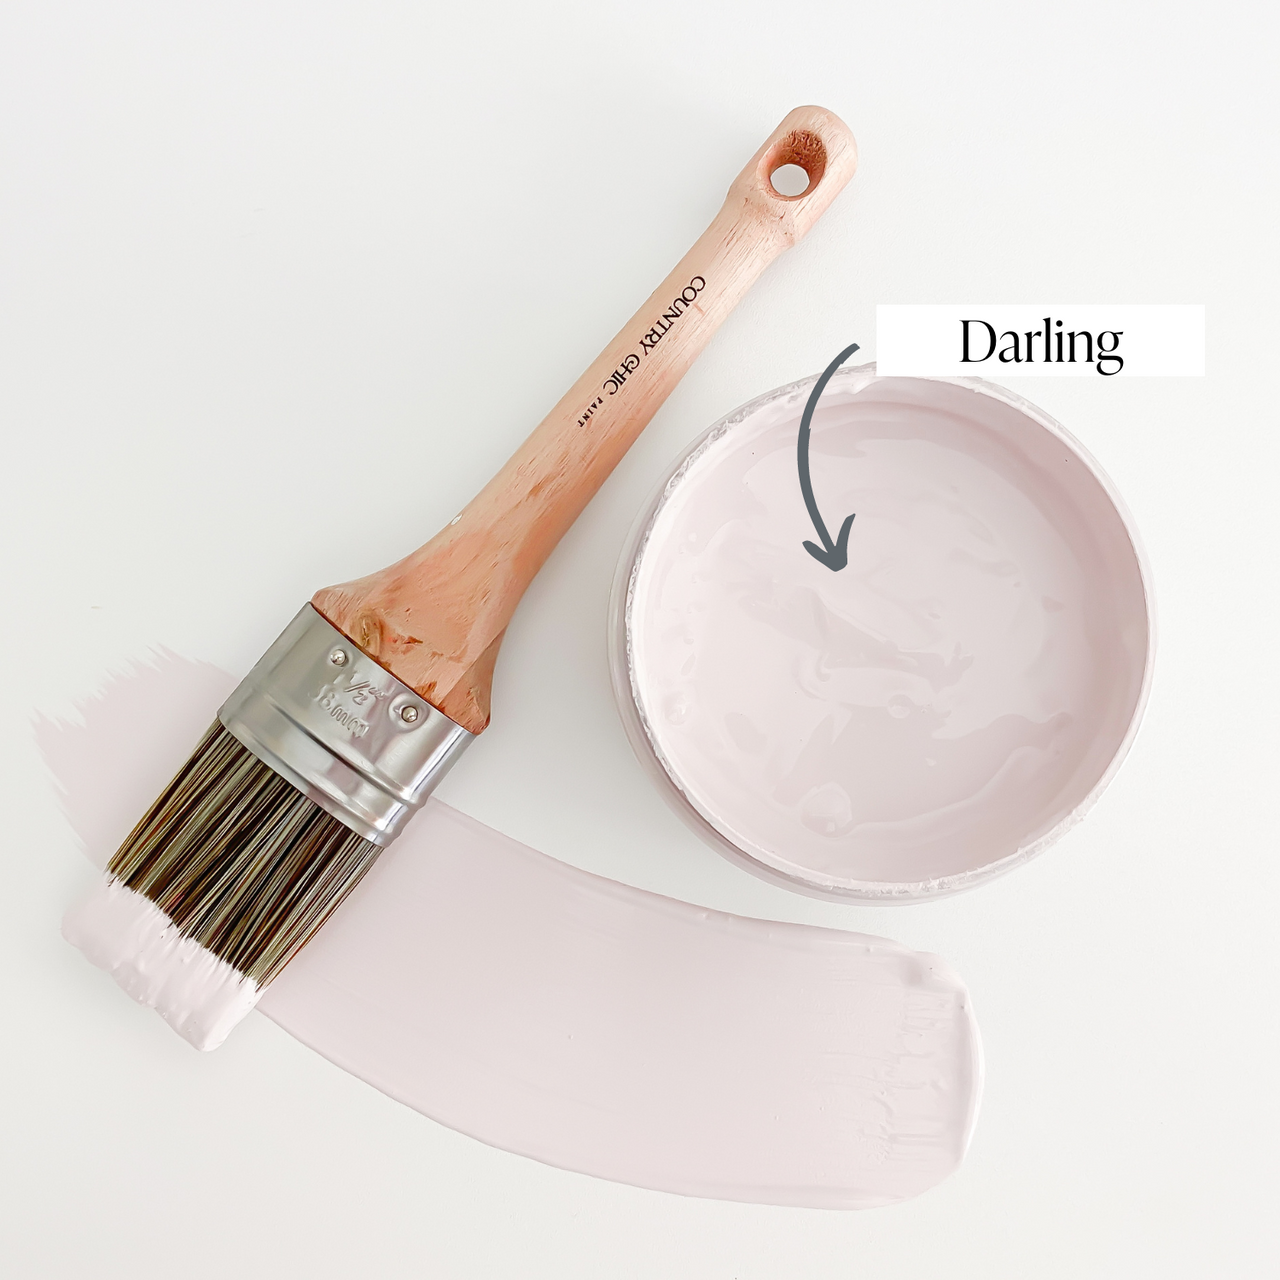 cottage instincts: ::Chalky Paint Review.Country Chic Paints